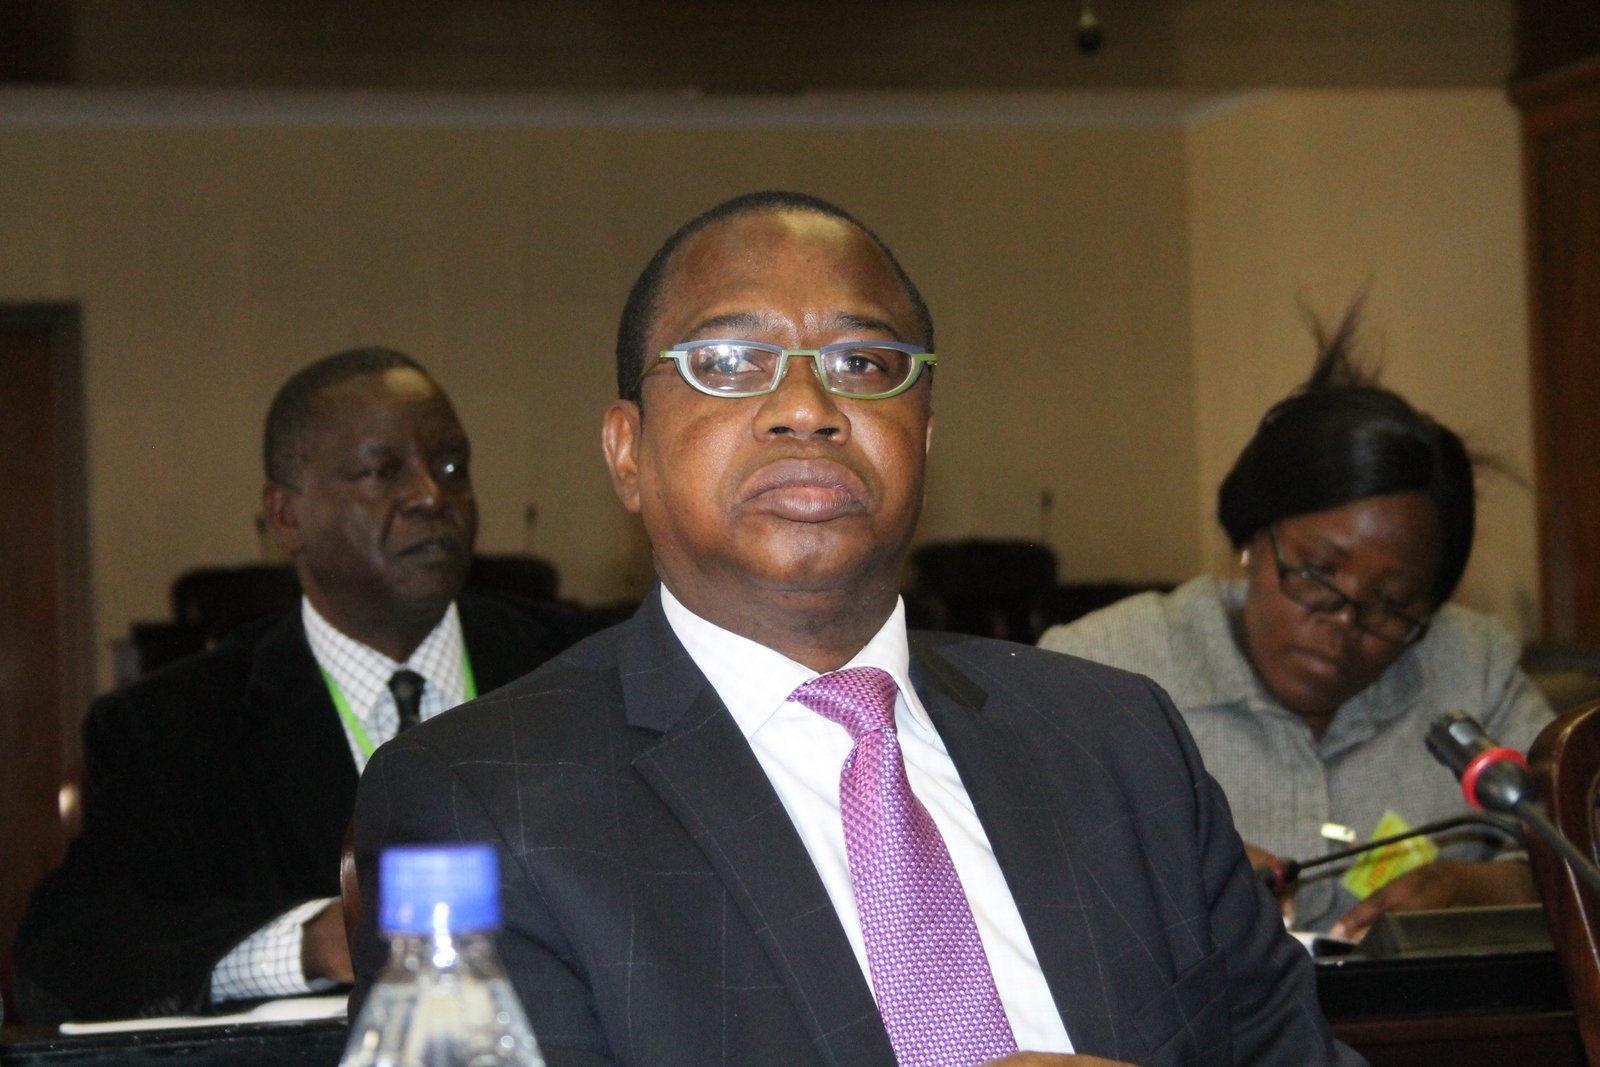 Mthuli Ncube: I engage with the public; they still have trust in me